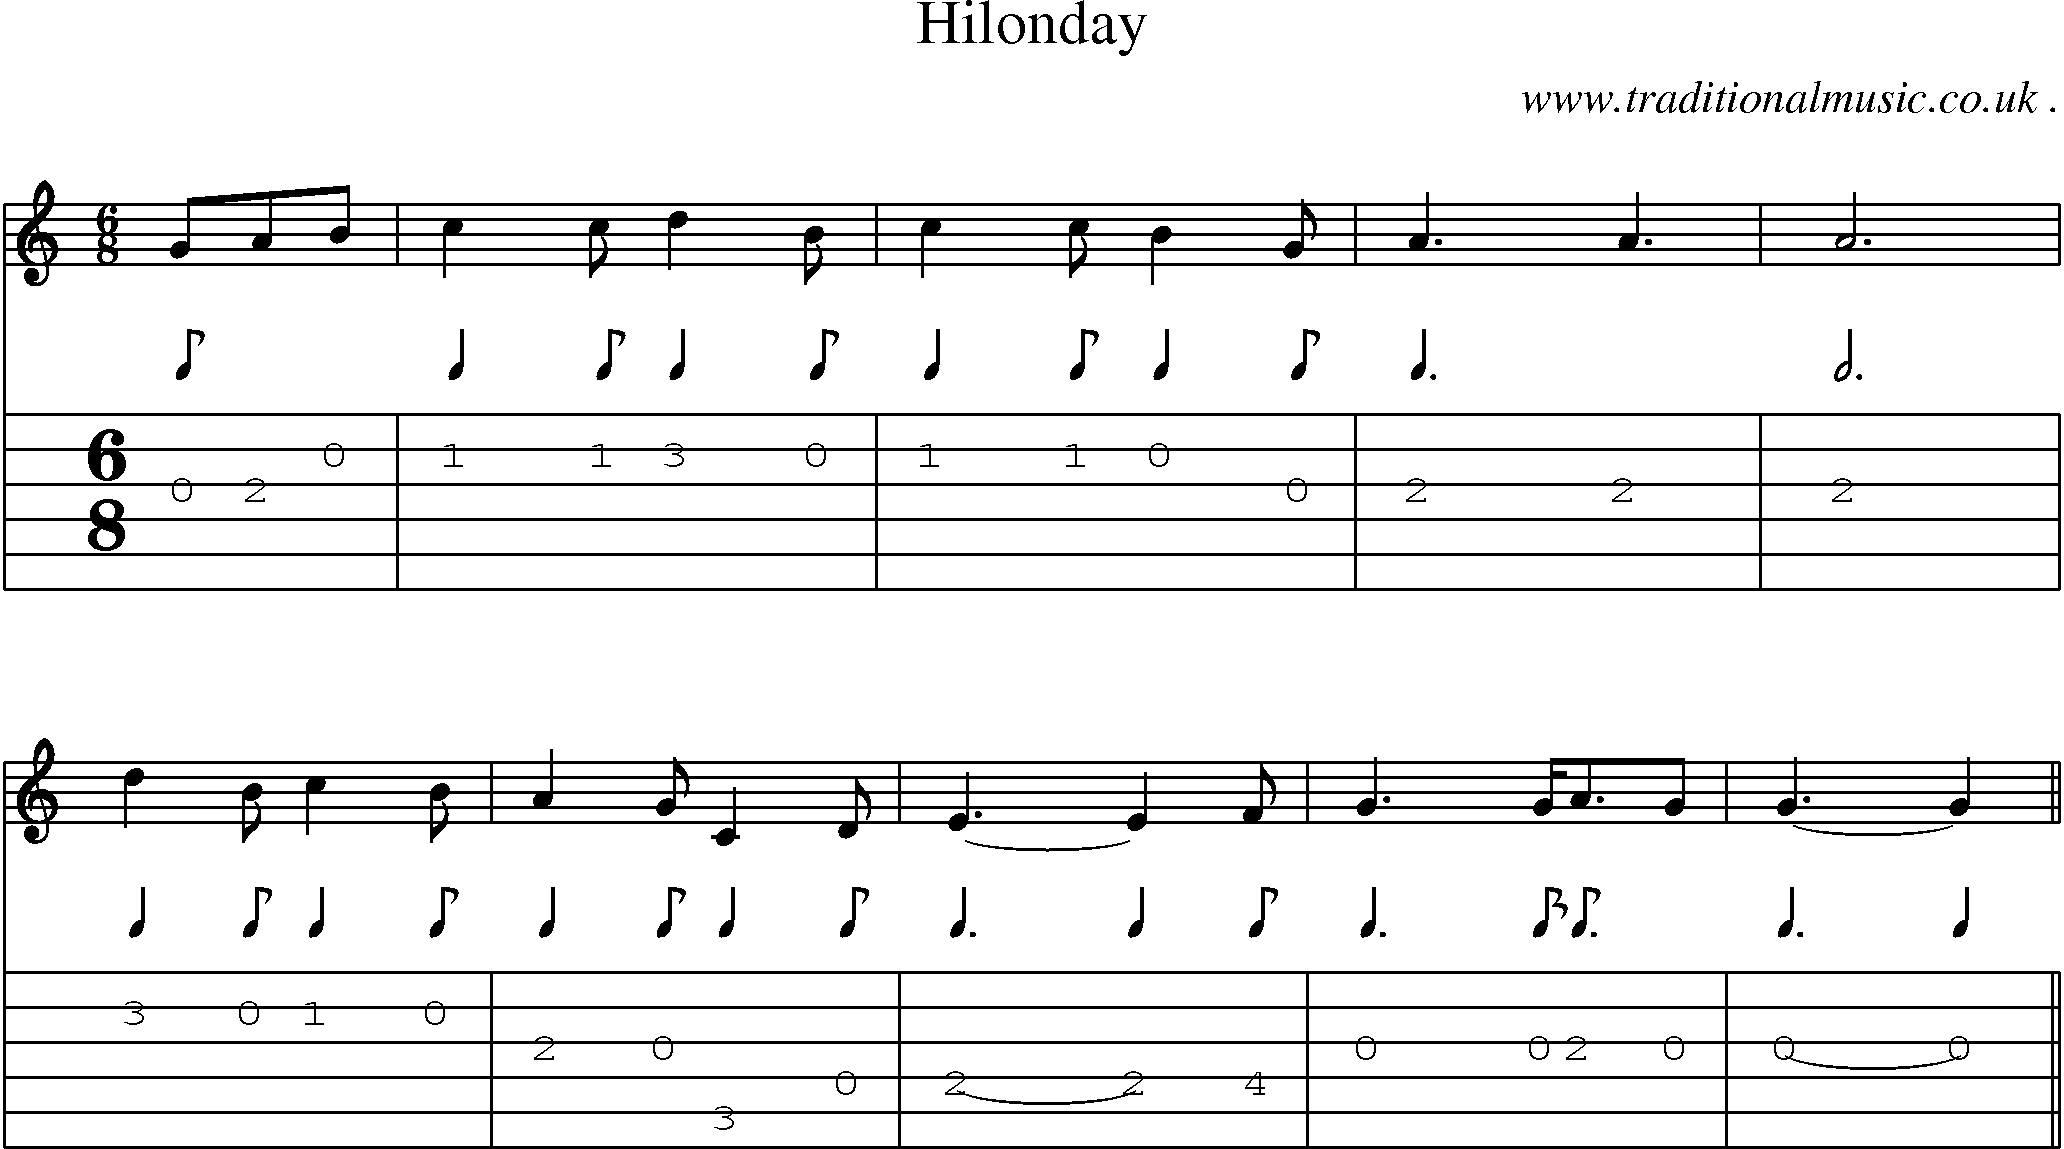 Sheet-Music and Guitar Tabs for Hilonday